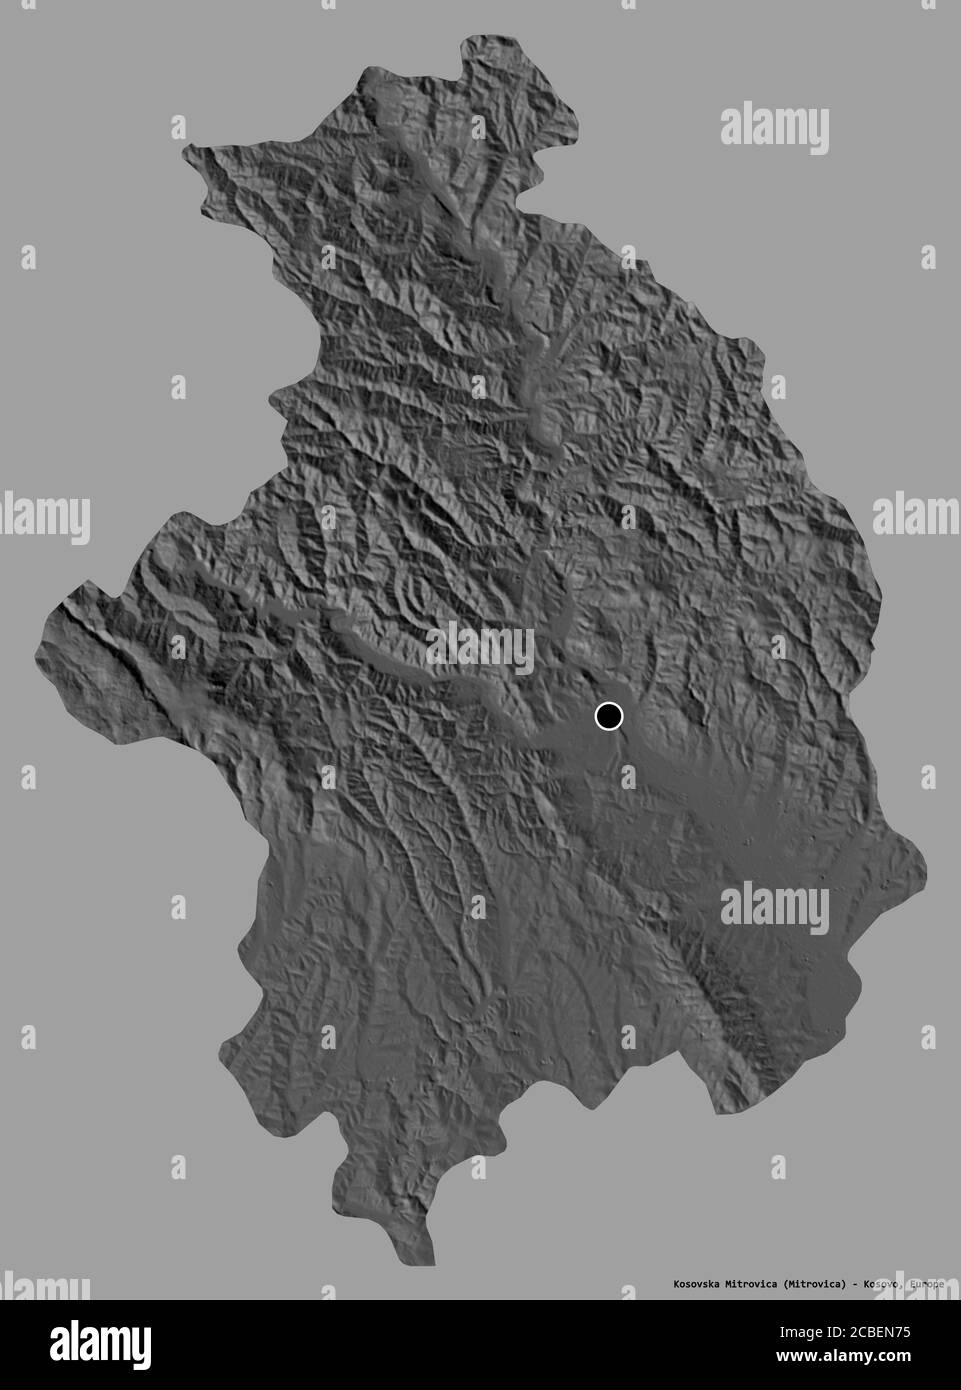 Shape of Kosovska Mitrovica, district of Kosovo, with its capital isolated on a solid color background. Bilevel elevation map. 3D rendering Stock Photo